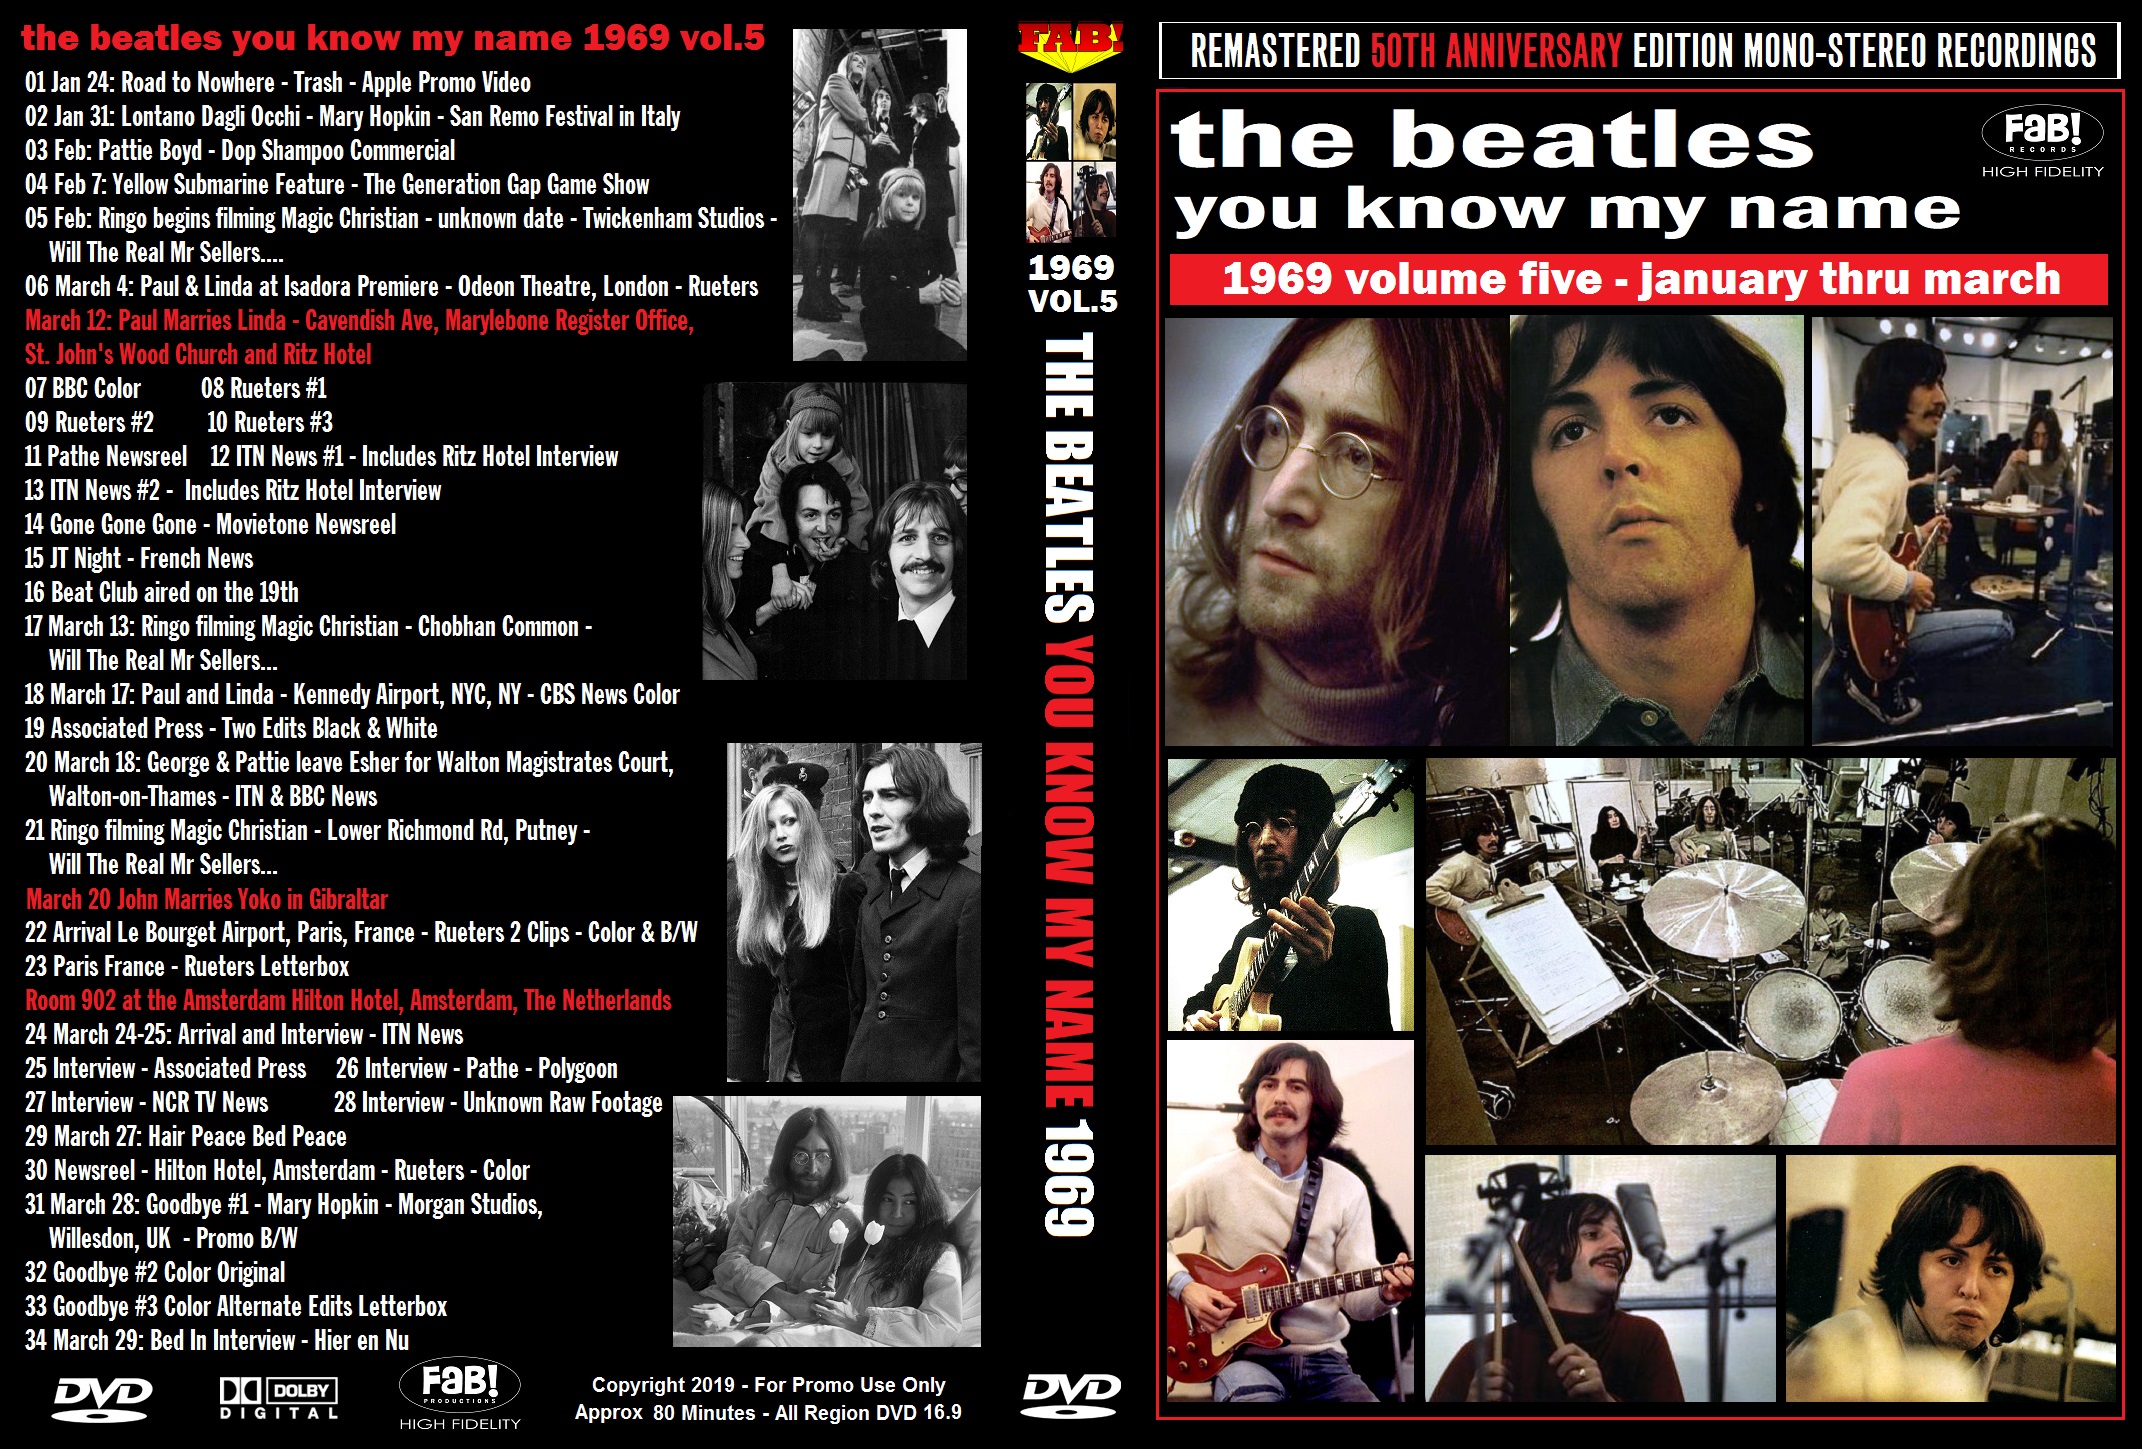 BS1120 - The Beatles - You Know My Name - 1969 Vol.5 RE (2019).jpg